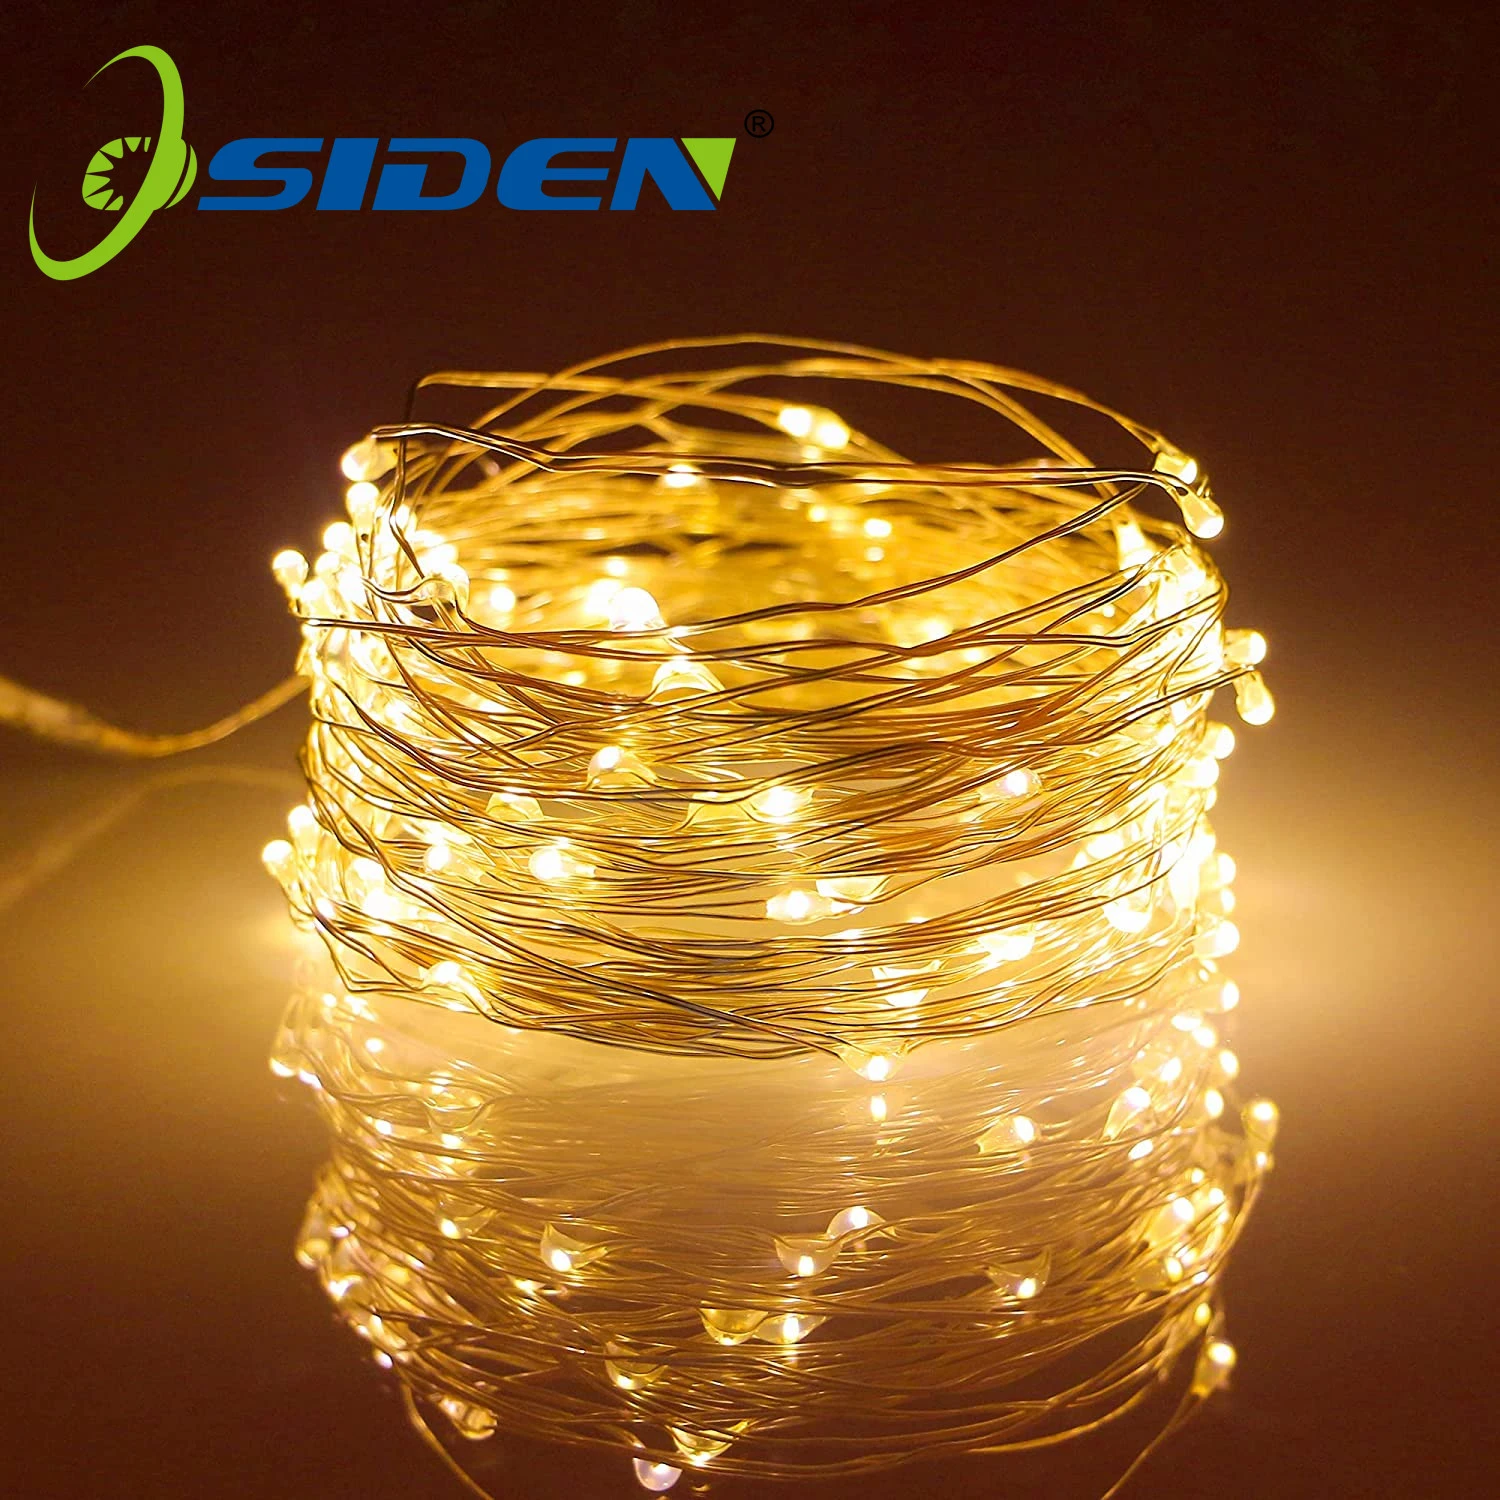 fairy light wall Led Fairy Lights Copper Wire String 1/2/5/10M Holiday Outdoor Lamp Garland For Christmas Tree Wedding Party Decoration twinkly smart decoration